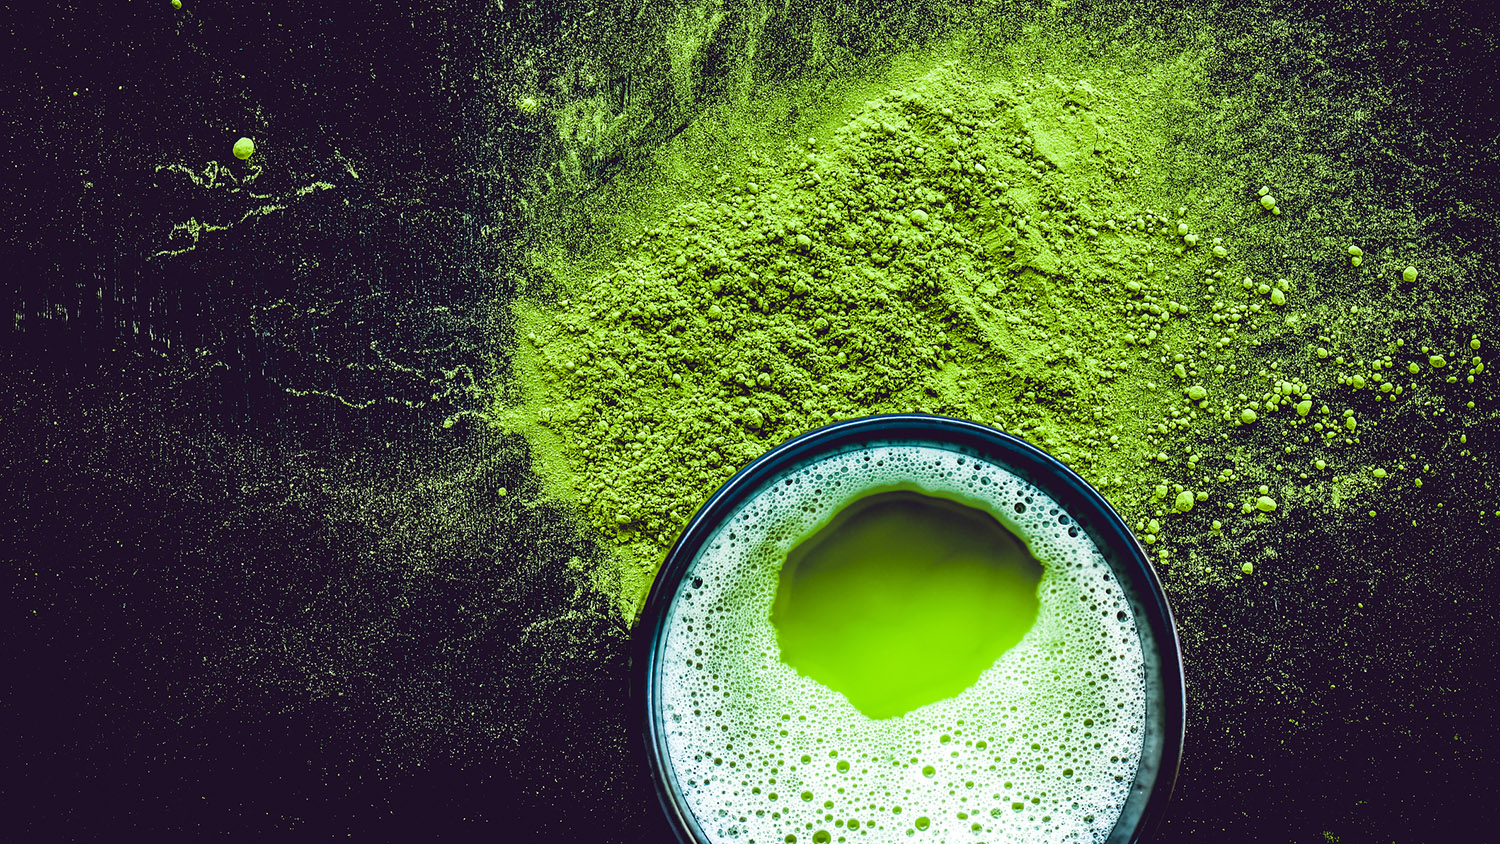 5 Reasons to Make Matcha Green Tea a Daily Habit in Your 60s